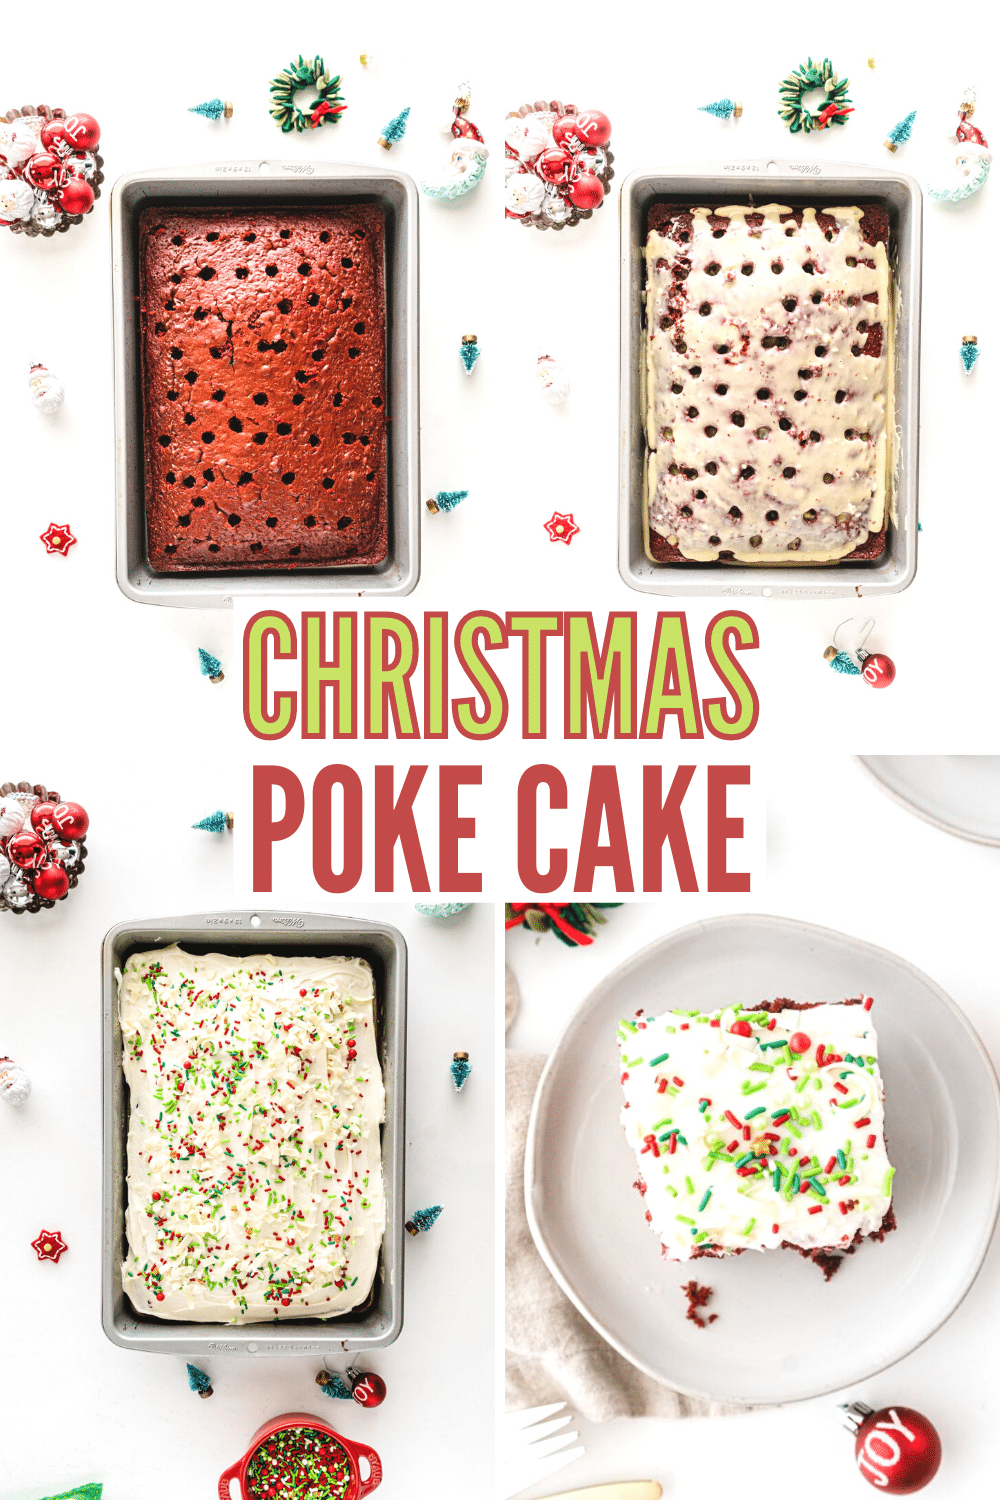 Christmas Poke Cake is so easy to make and makes for a festive dessert. If you love easy Christmas recipes then this is the recipe for you. #christmas #pokecake #cake #dessert #recipe via @wondermomwannab